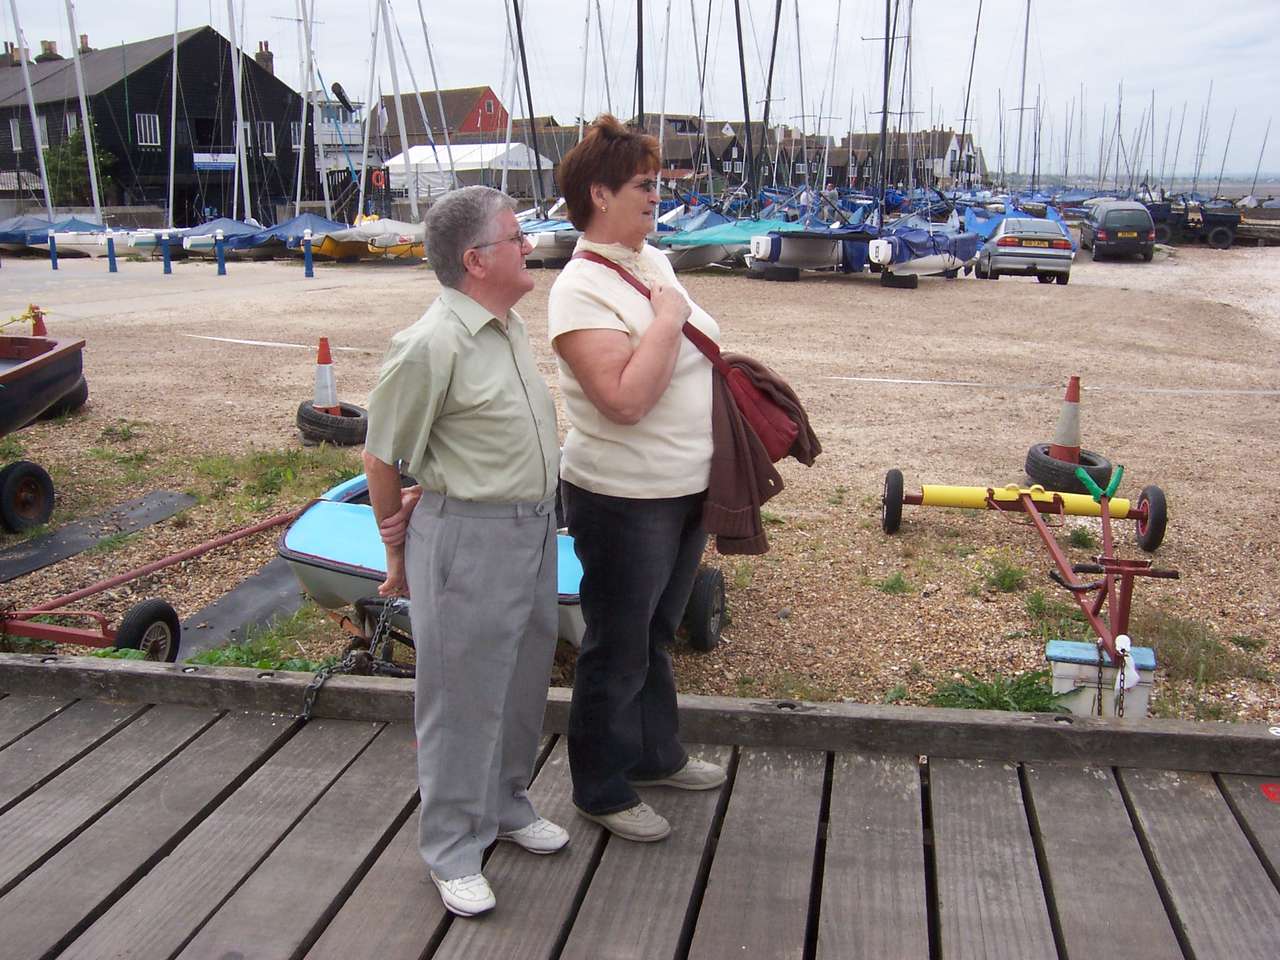 Fay & Eric in England puzzle online from photo